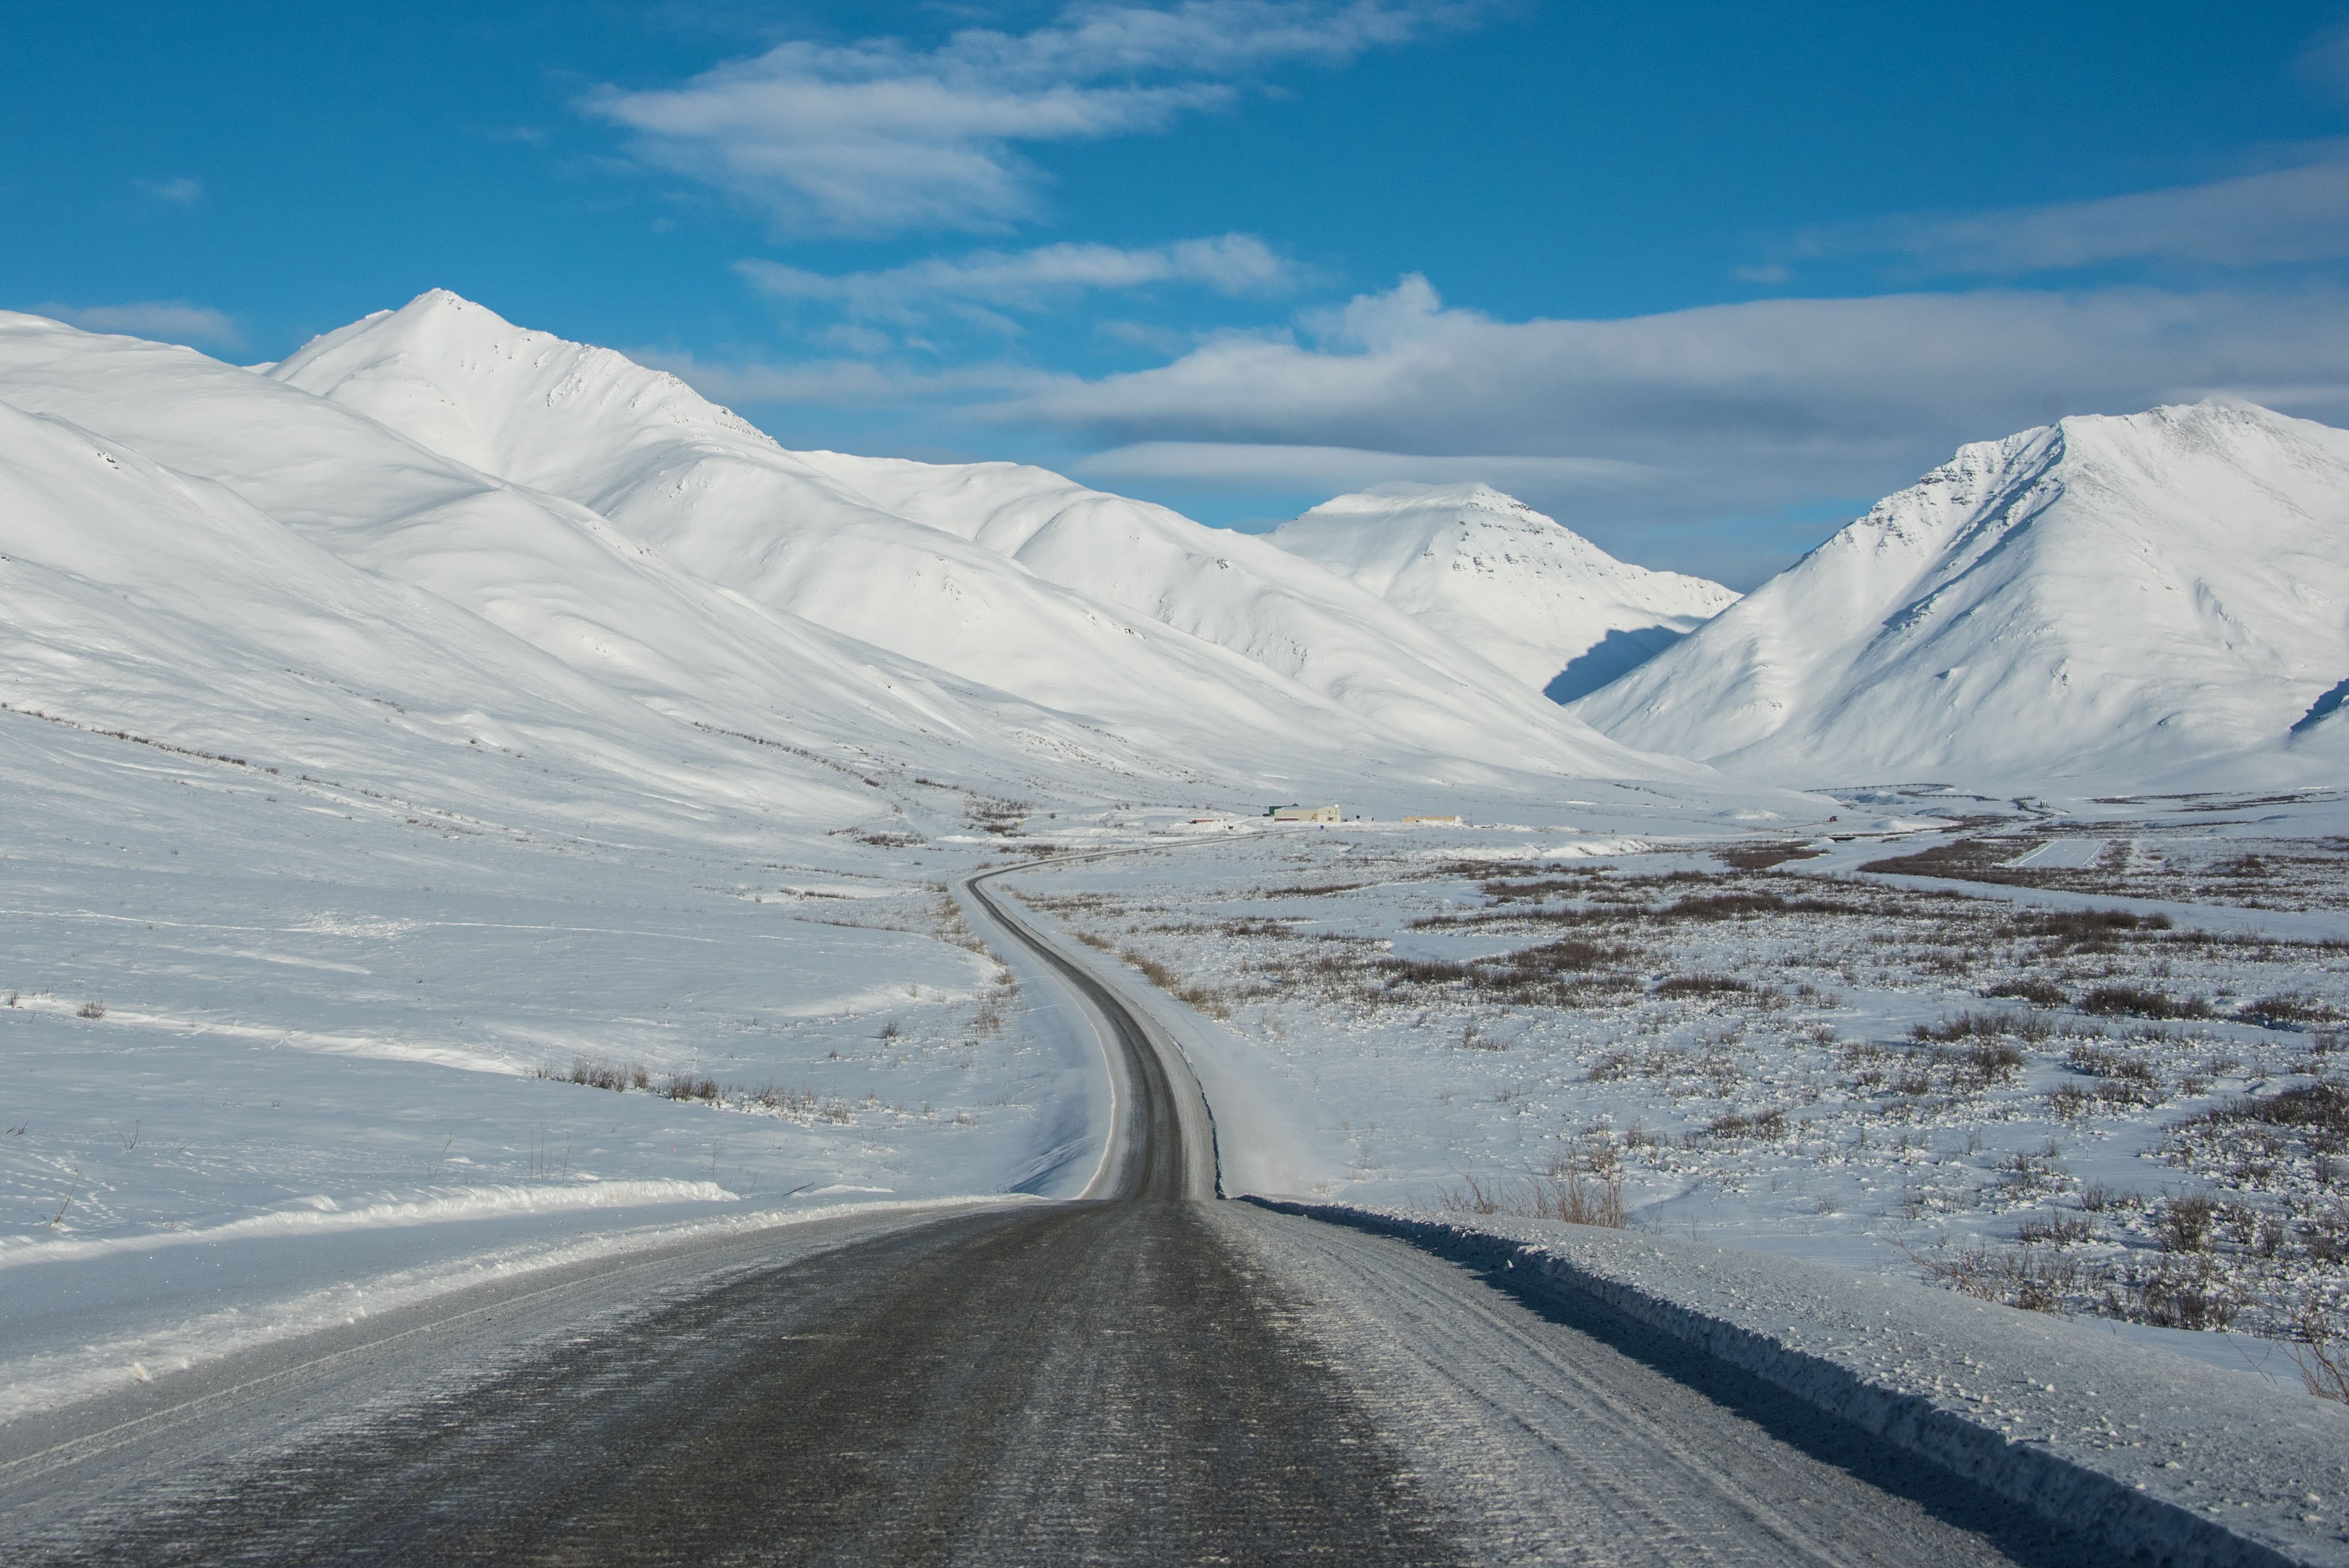 Winter drive on The Dalton Highway - February 2016 - YouTube